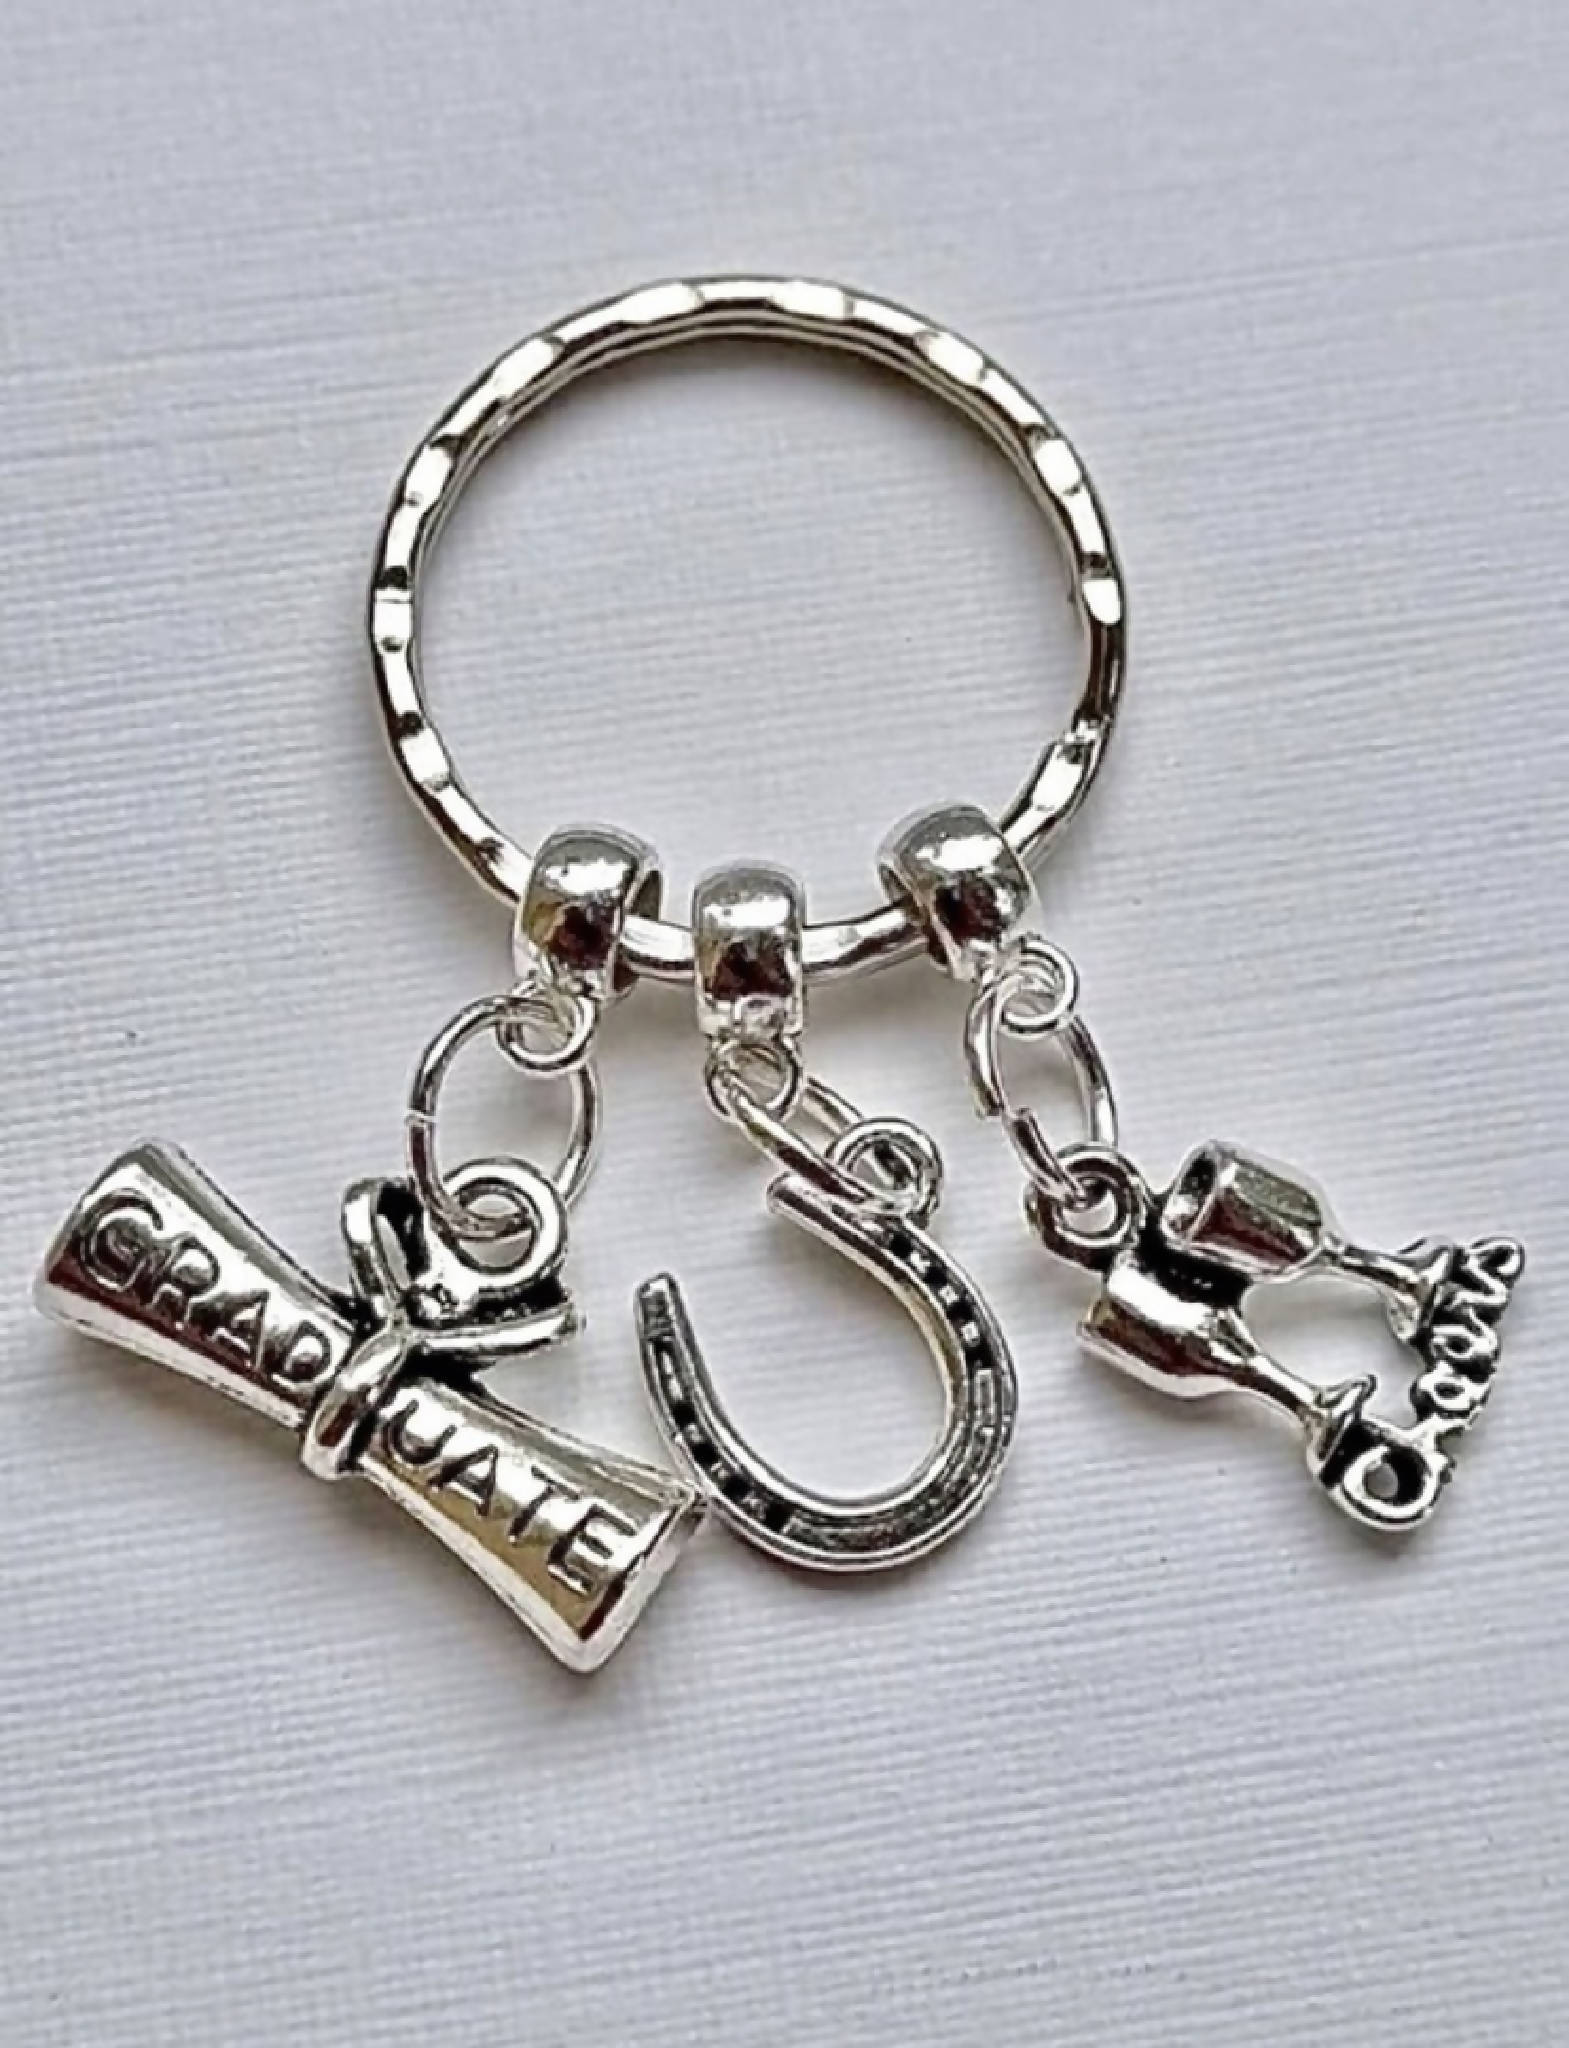 Graduation gift keyring with 3 charms; a scroll, a lucky horseshoe and two goblets, and the word ‘Cheers’. A super gift for a graduate.